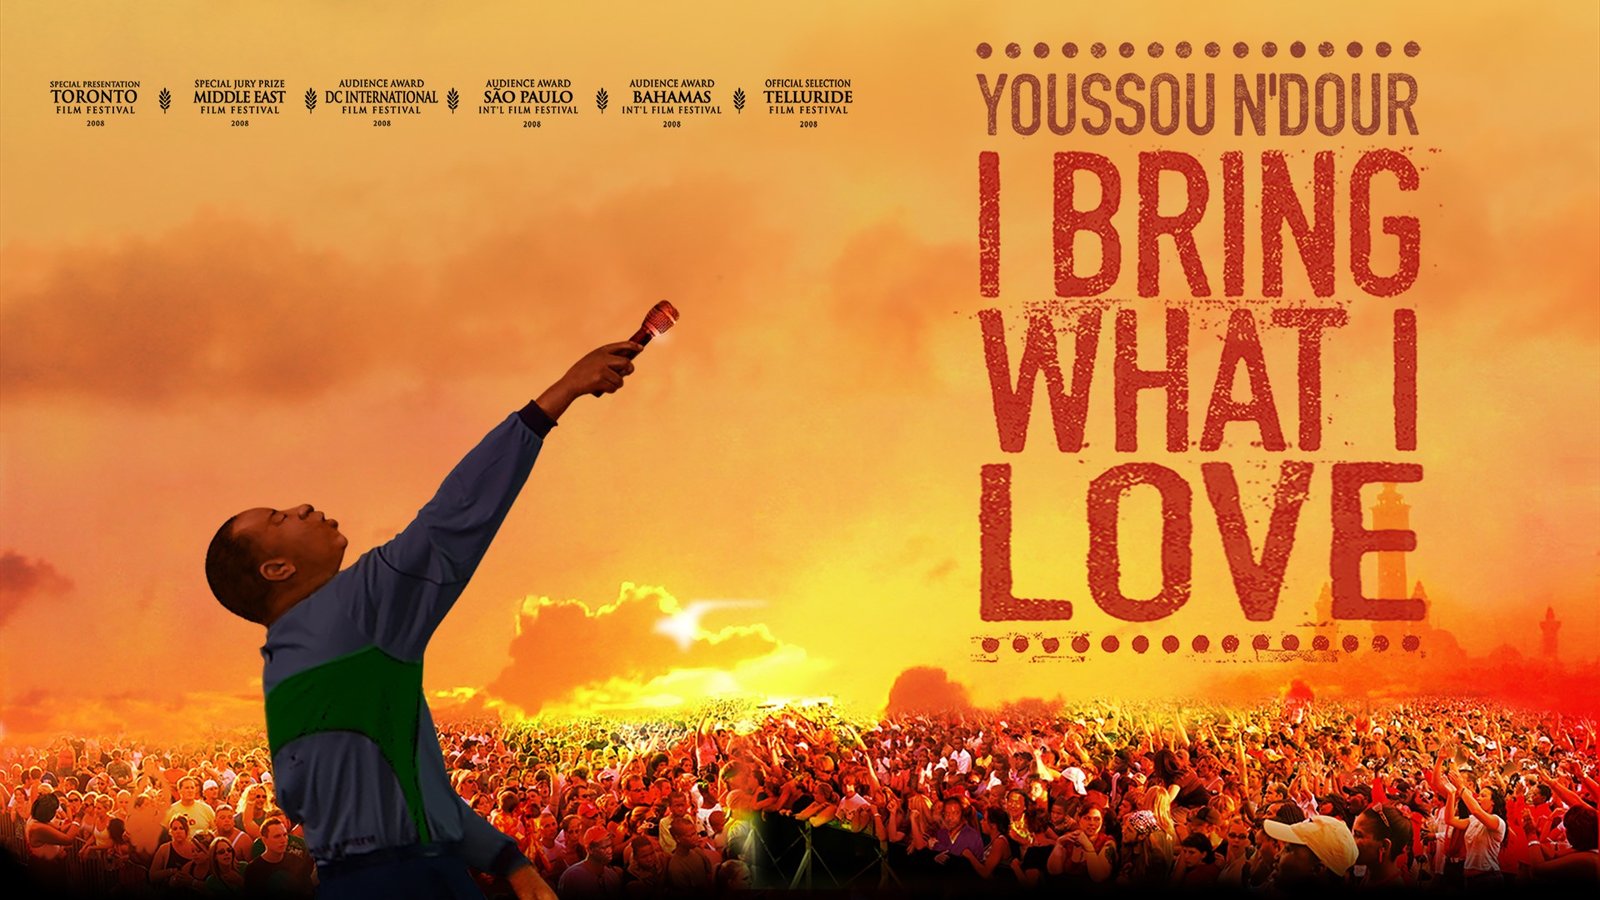 Youssou N'dour: I Bring What I Love - The Life and Music of a Senegalese Pop Star